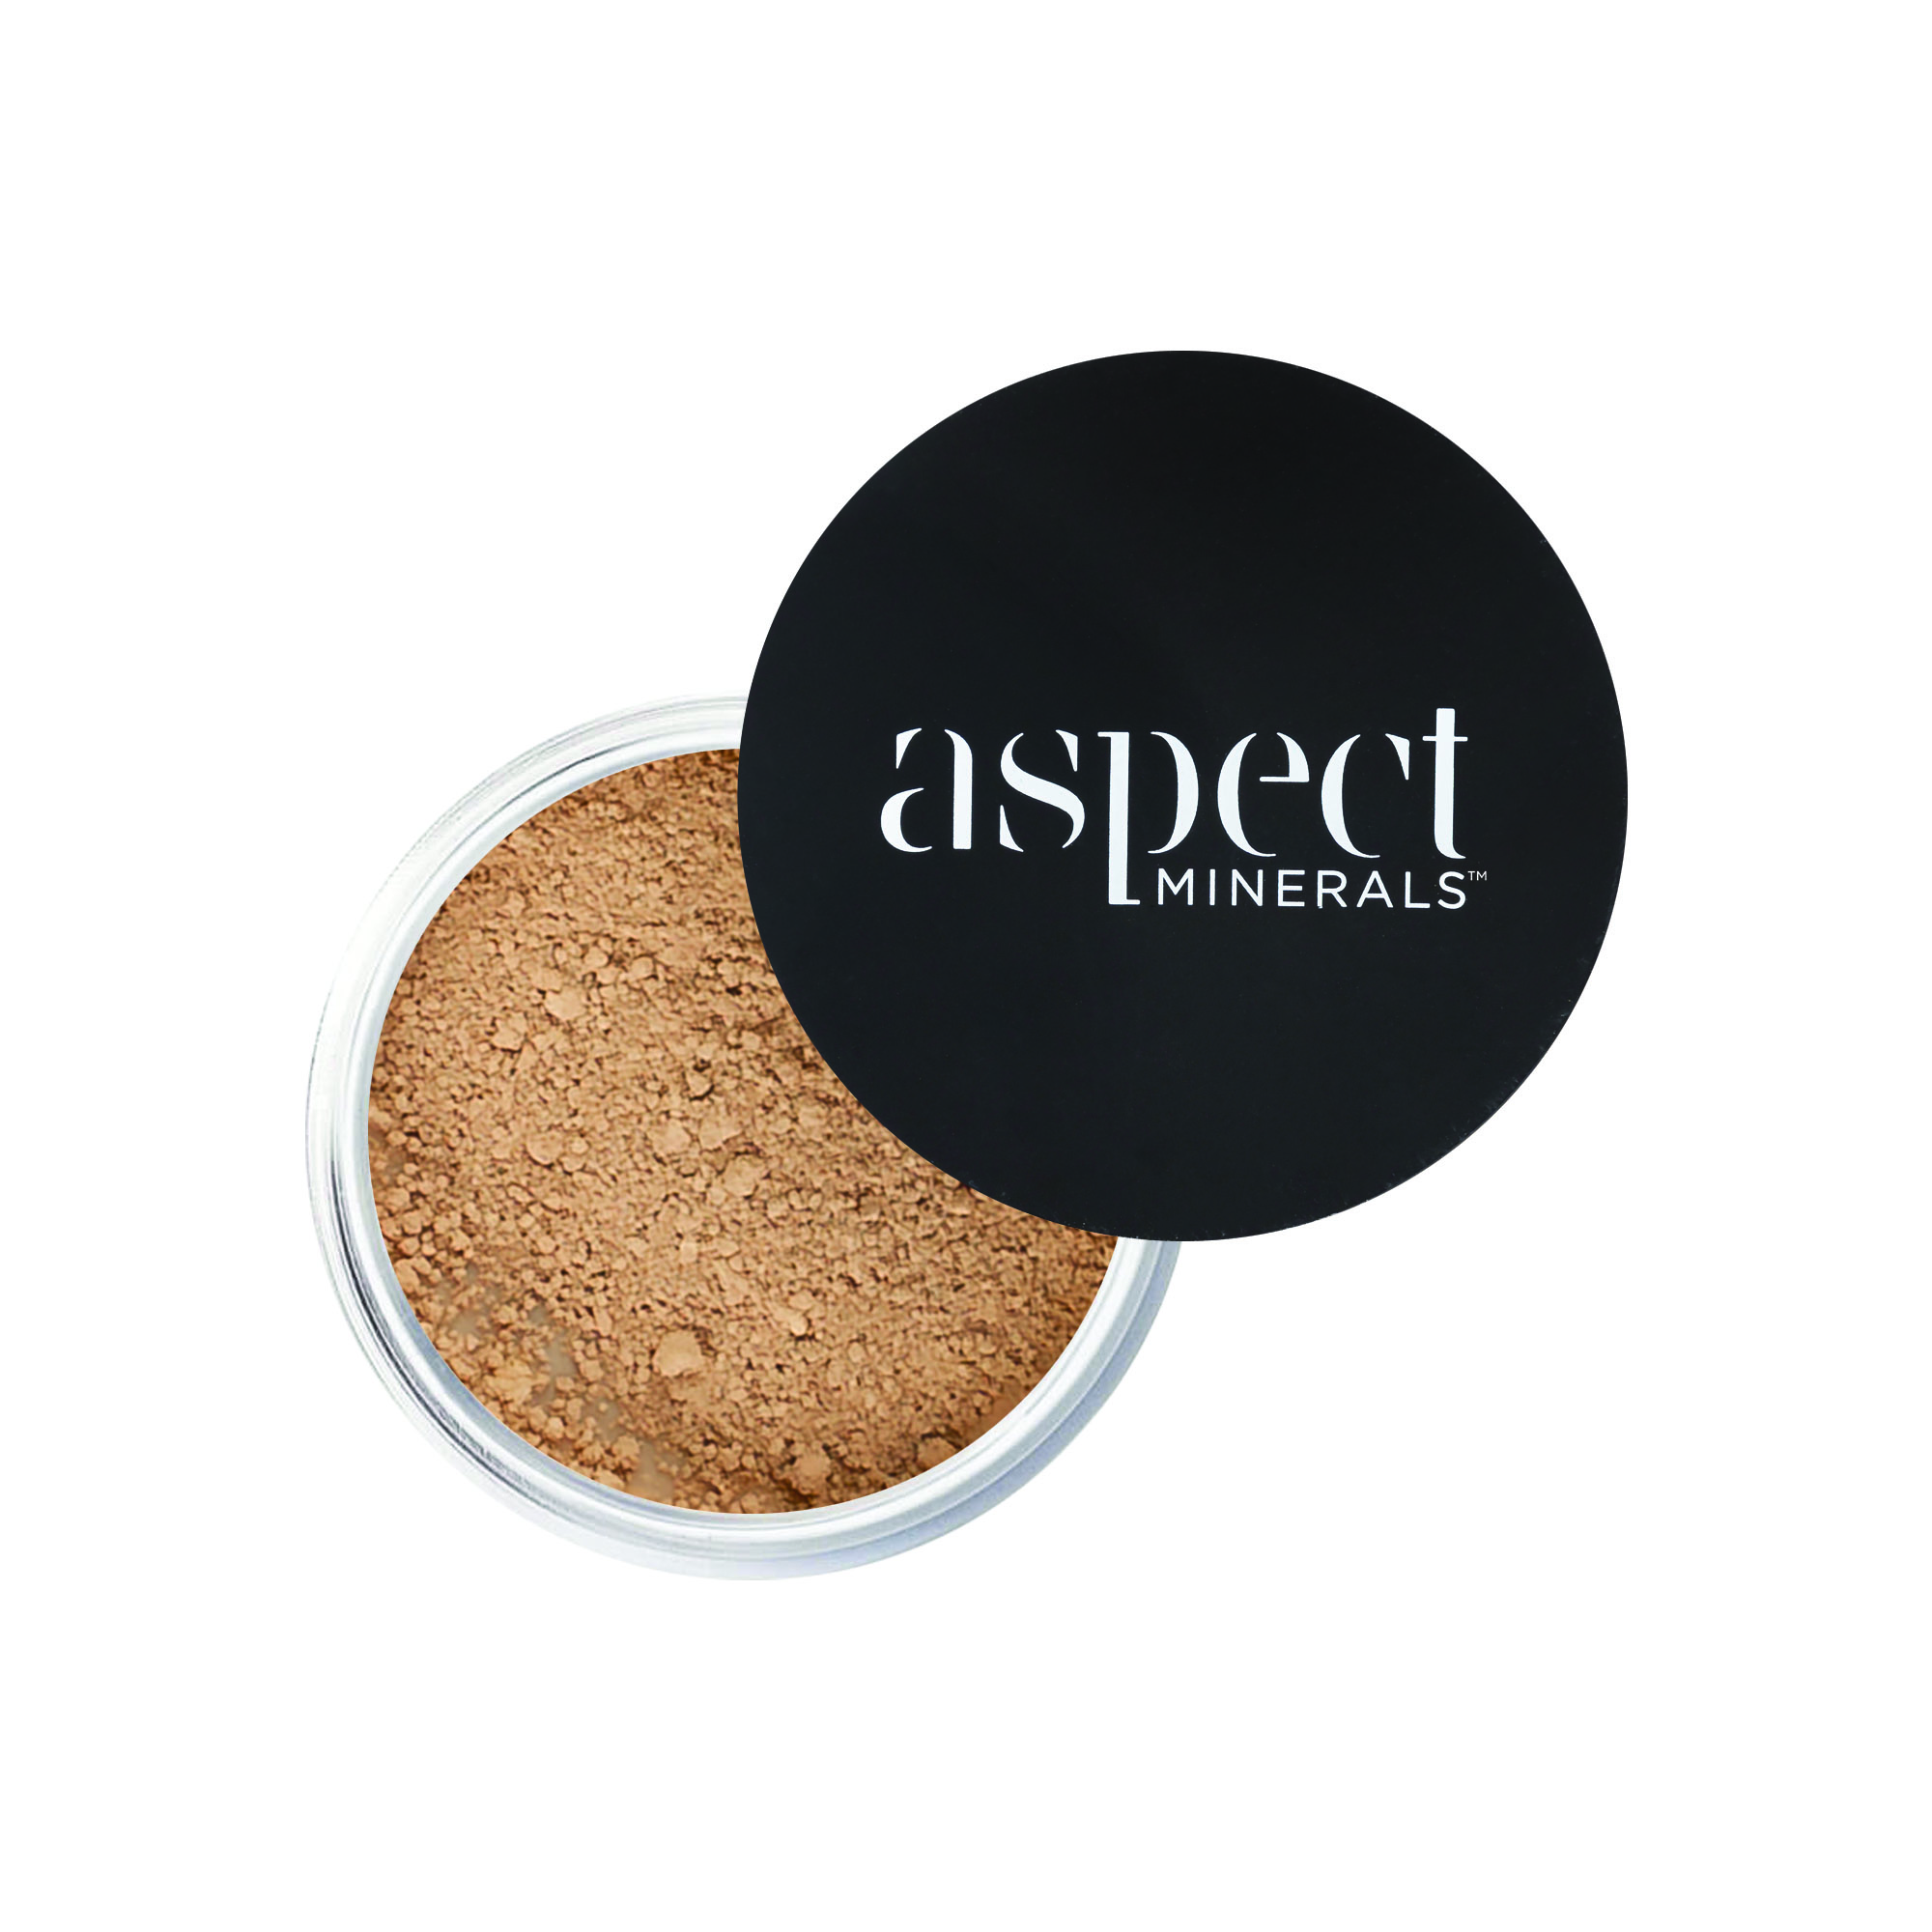 Aspect Minerals Powder Two Product Image